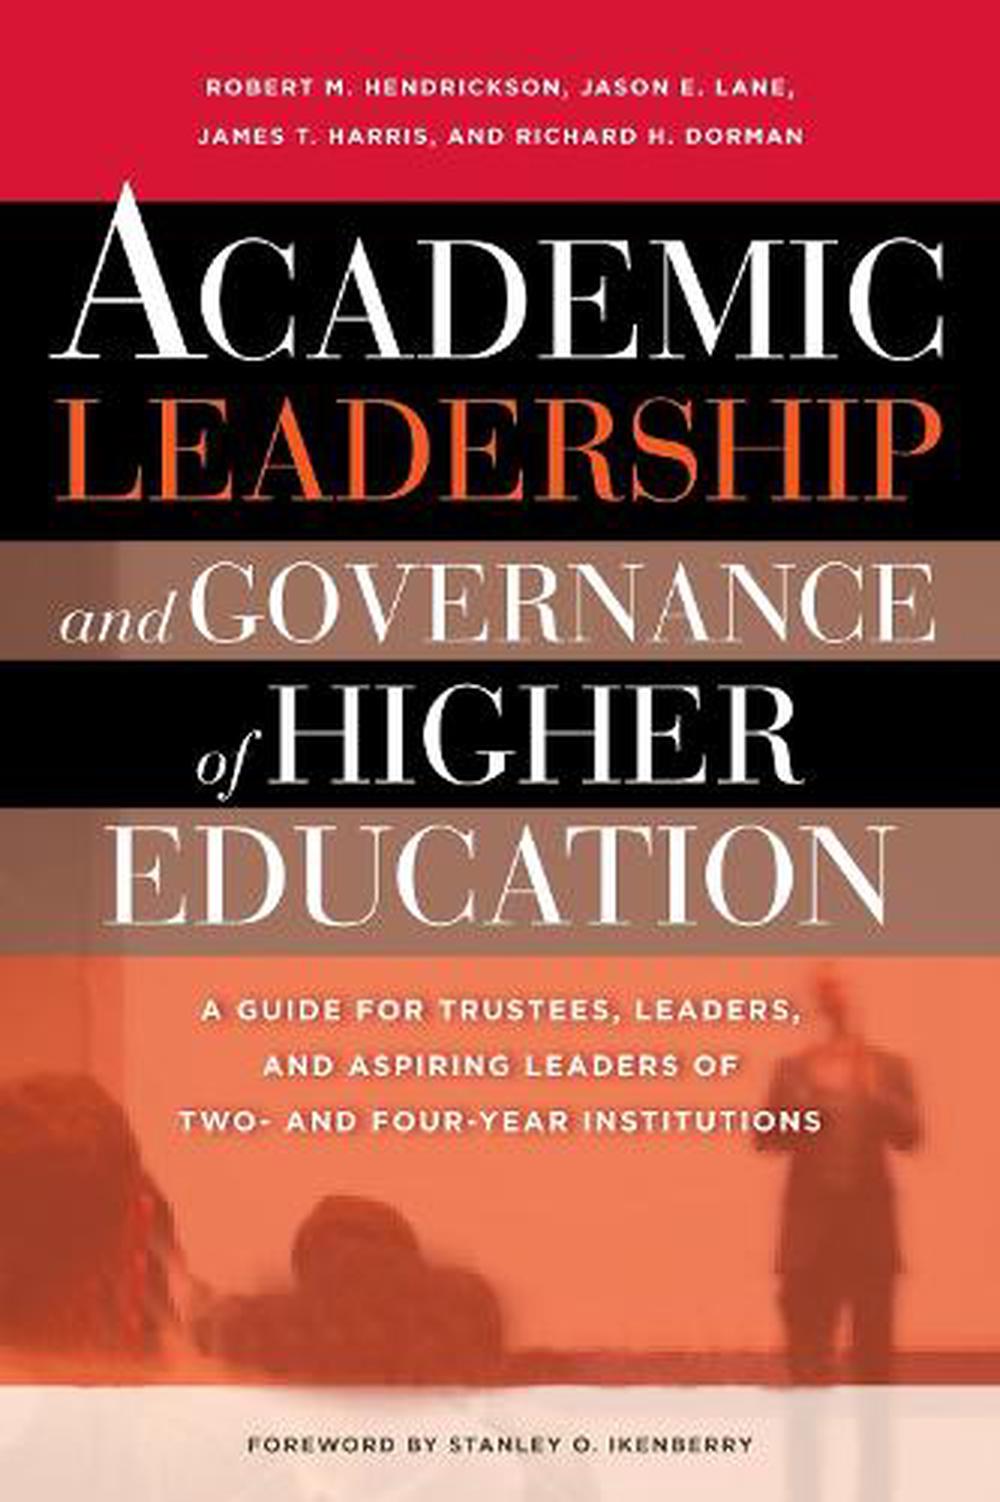 Academic Leadership and Governance of Higher Education by Robert M